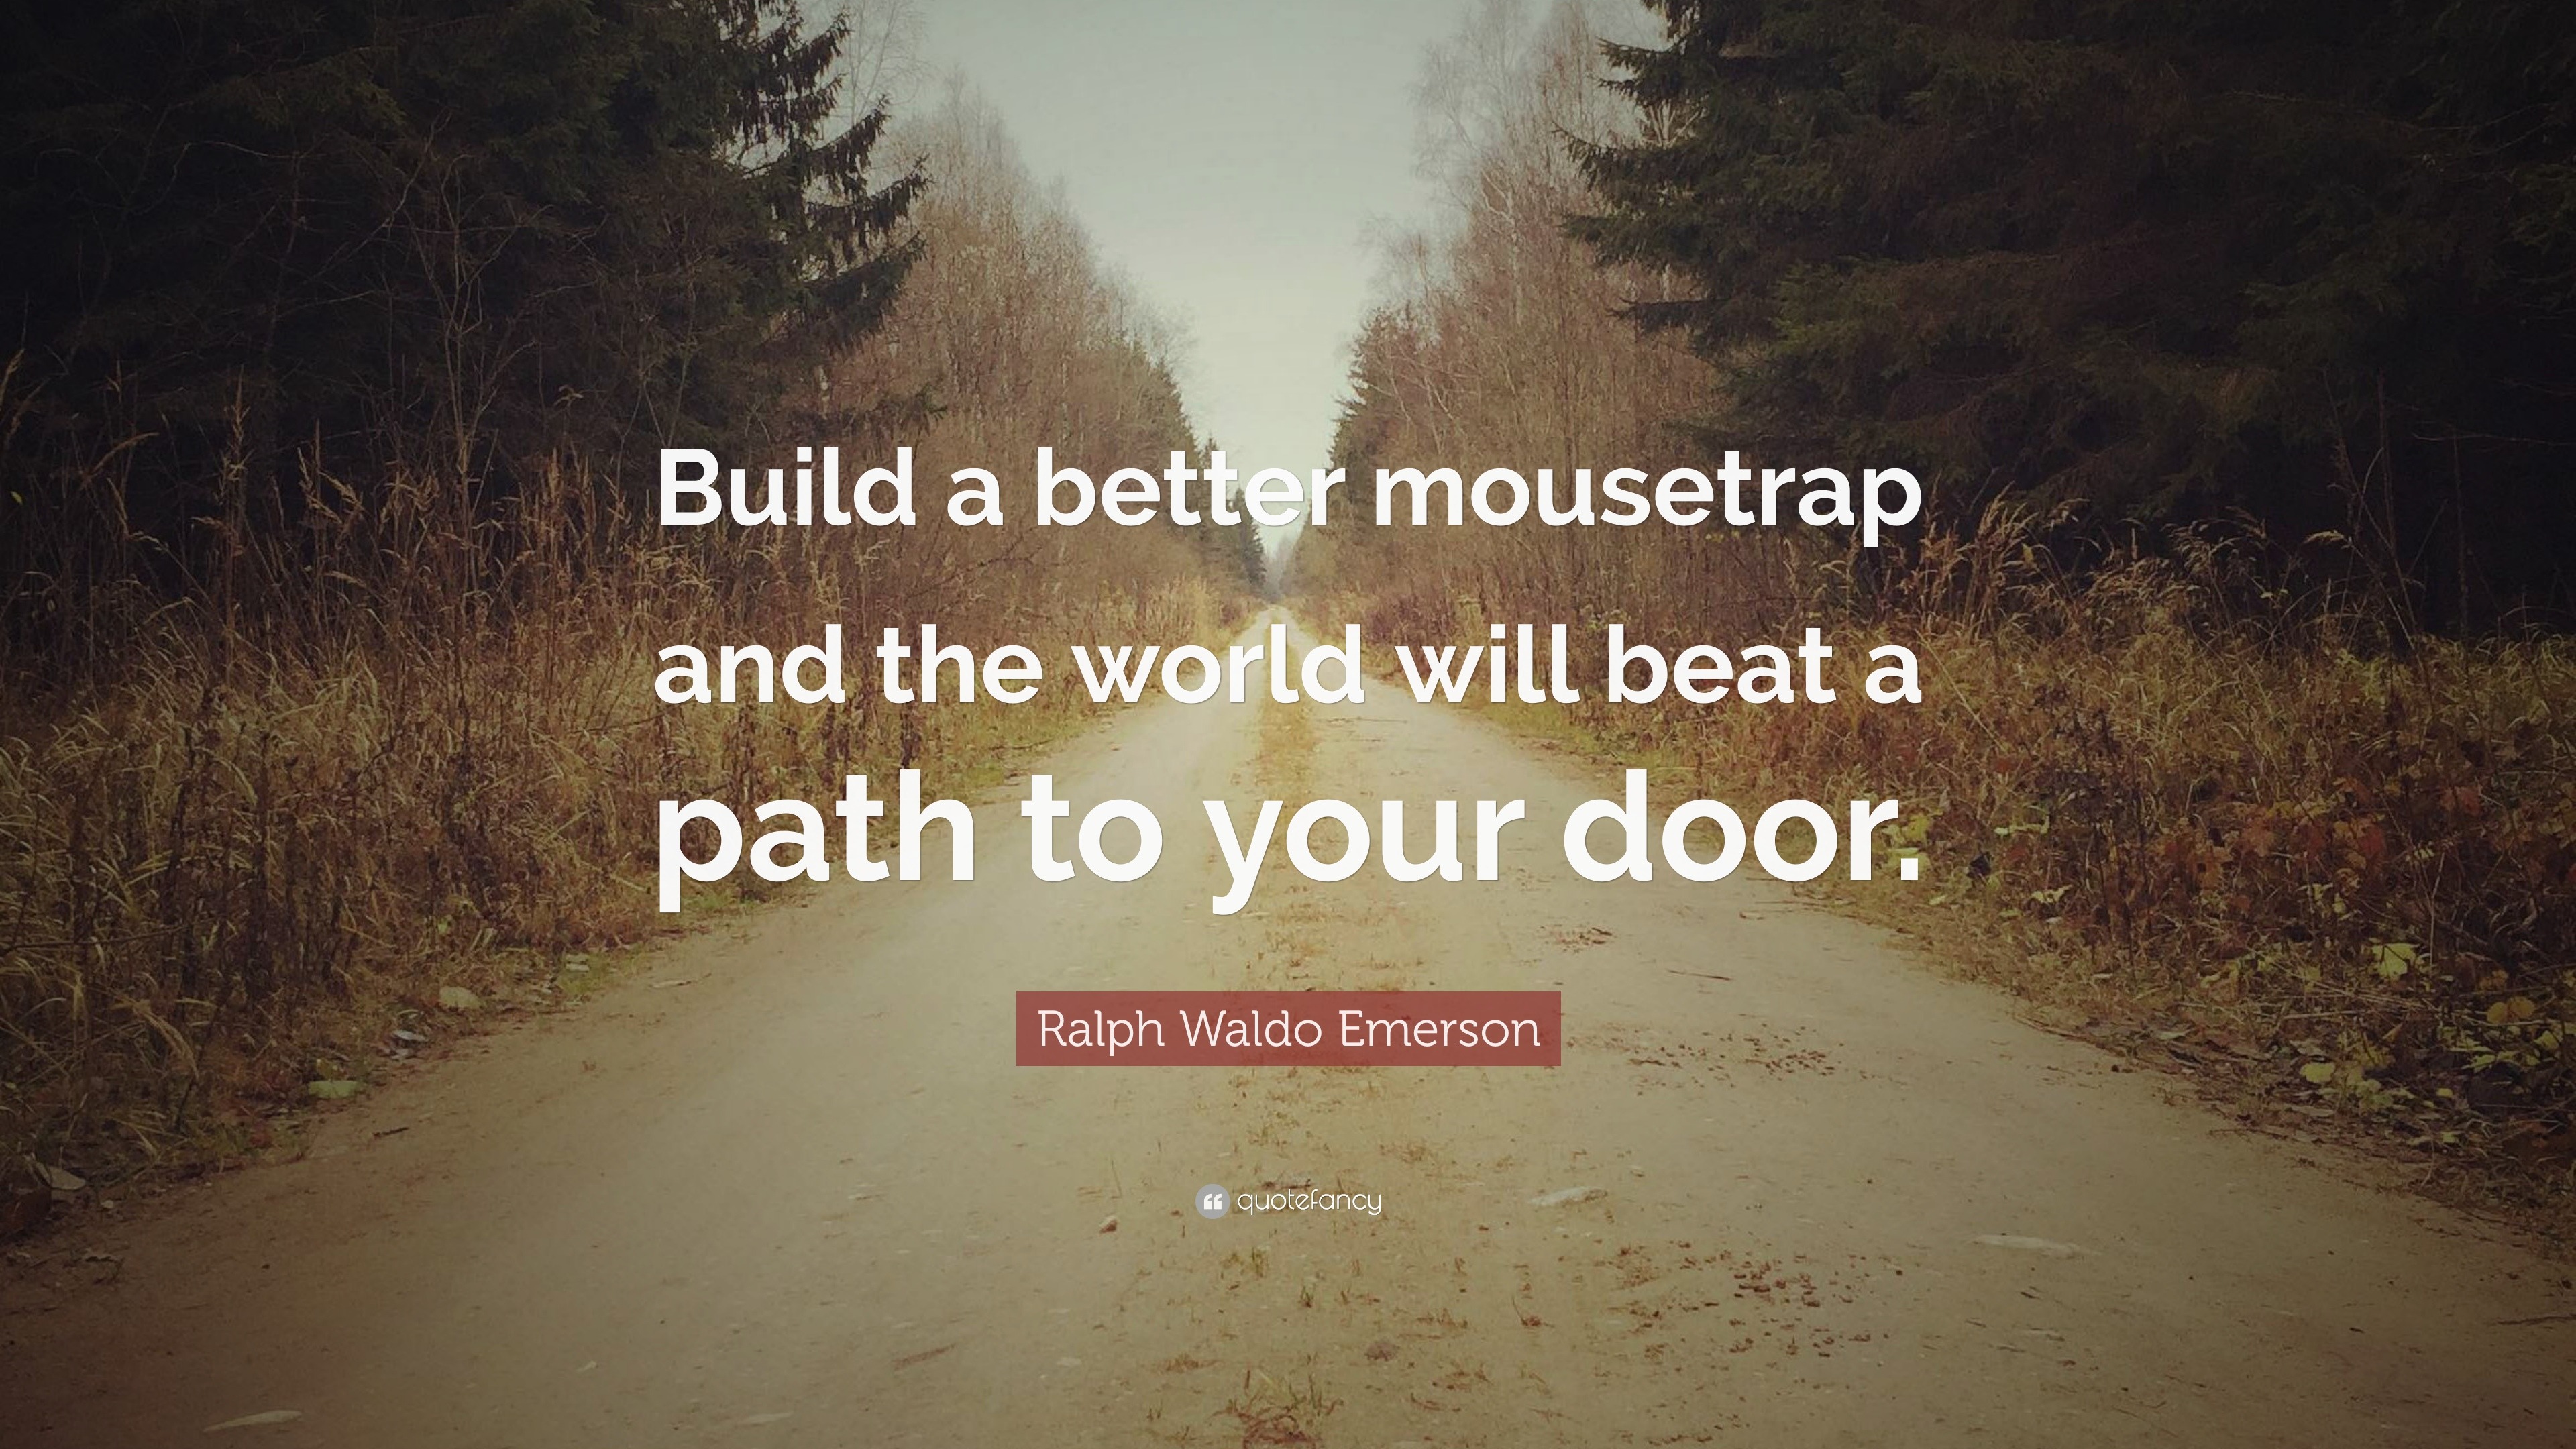 Ralph Waldo Emerson Quote: “Build a better mousetrap and the world will beat  a path to